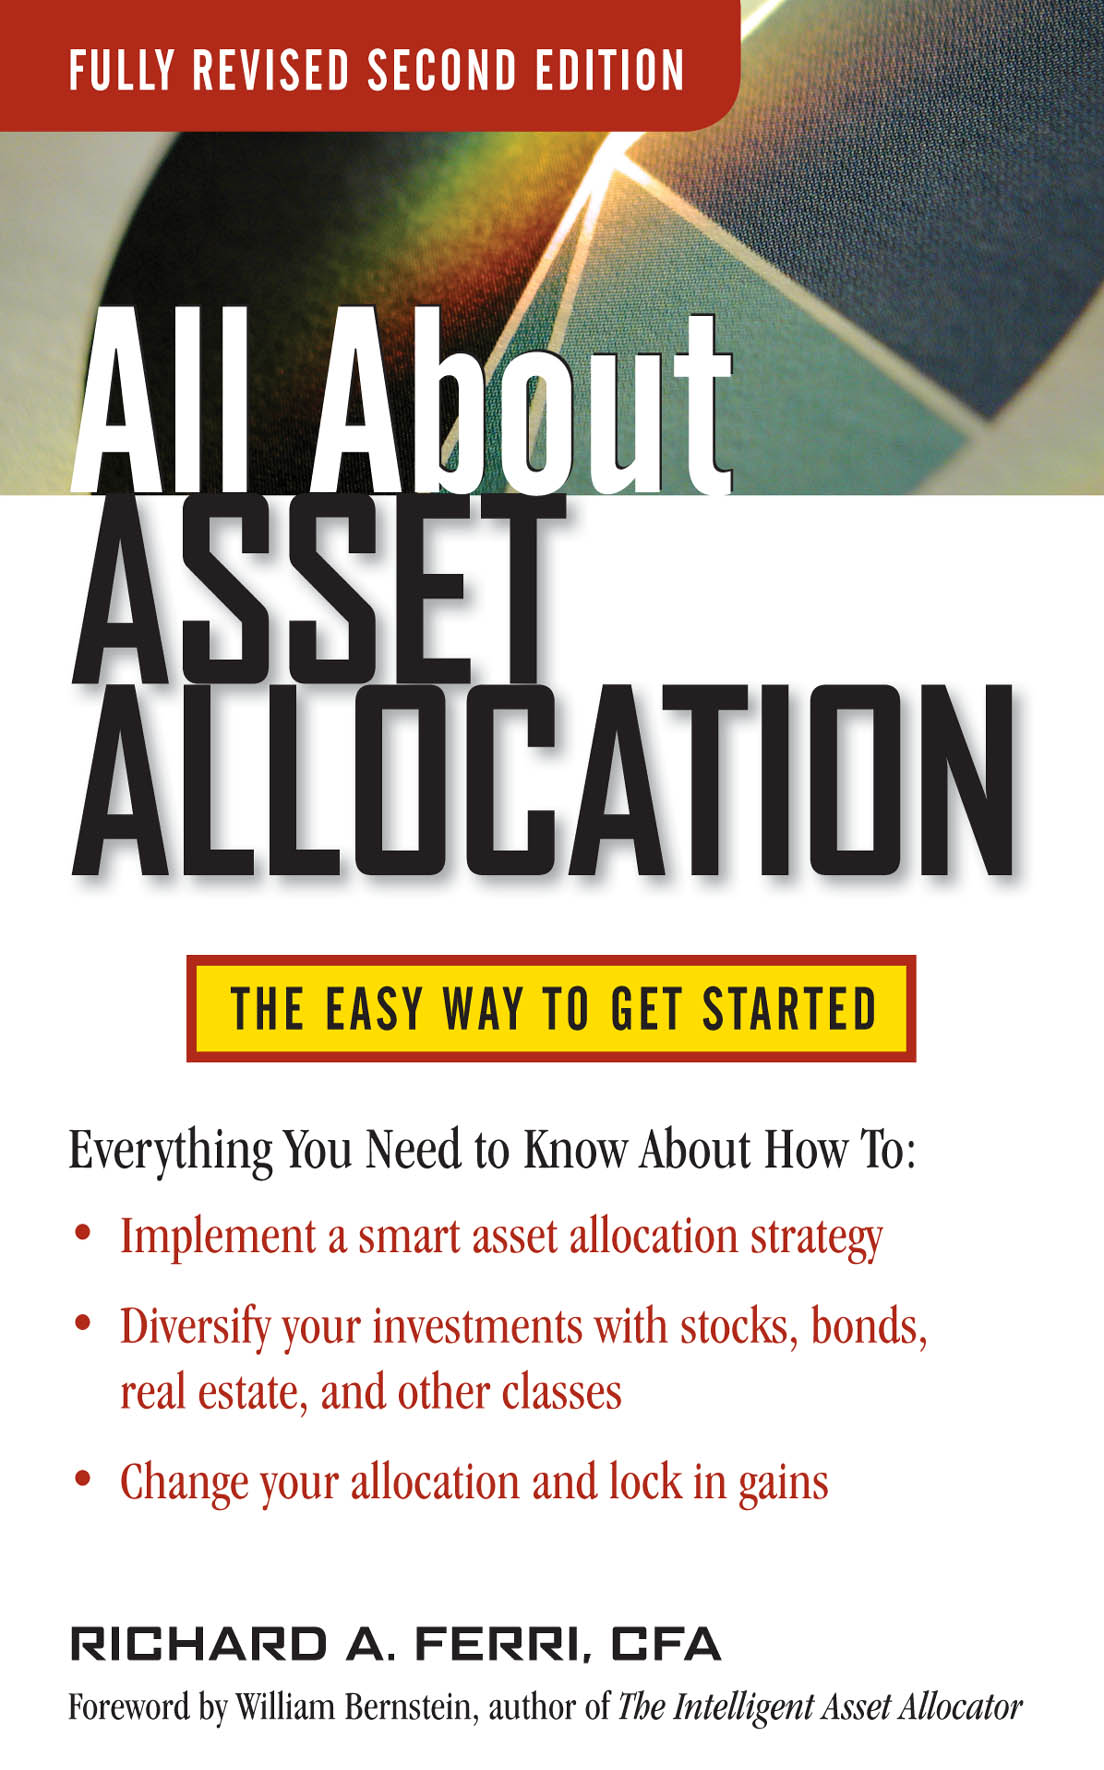 All About Asset Allocation, Second Edition - 15-24.99